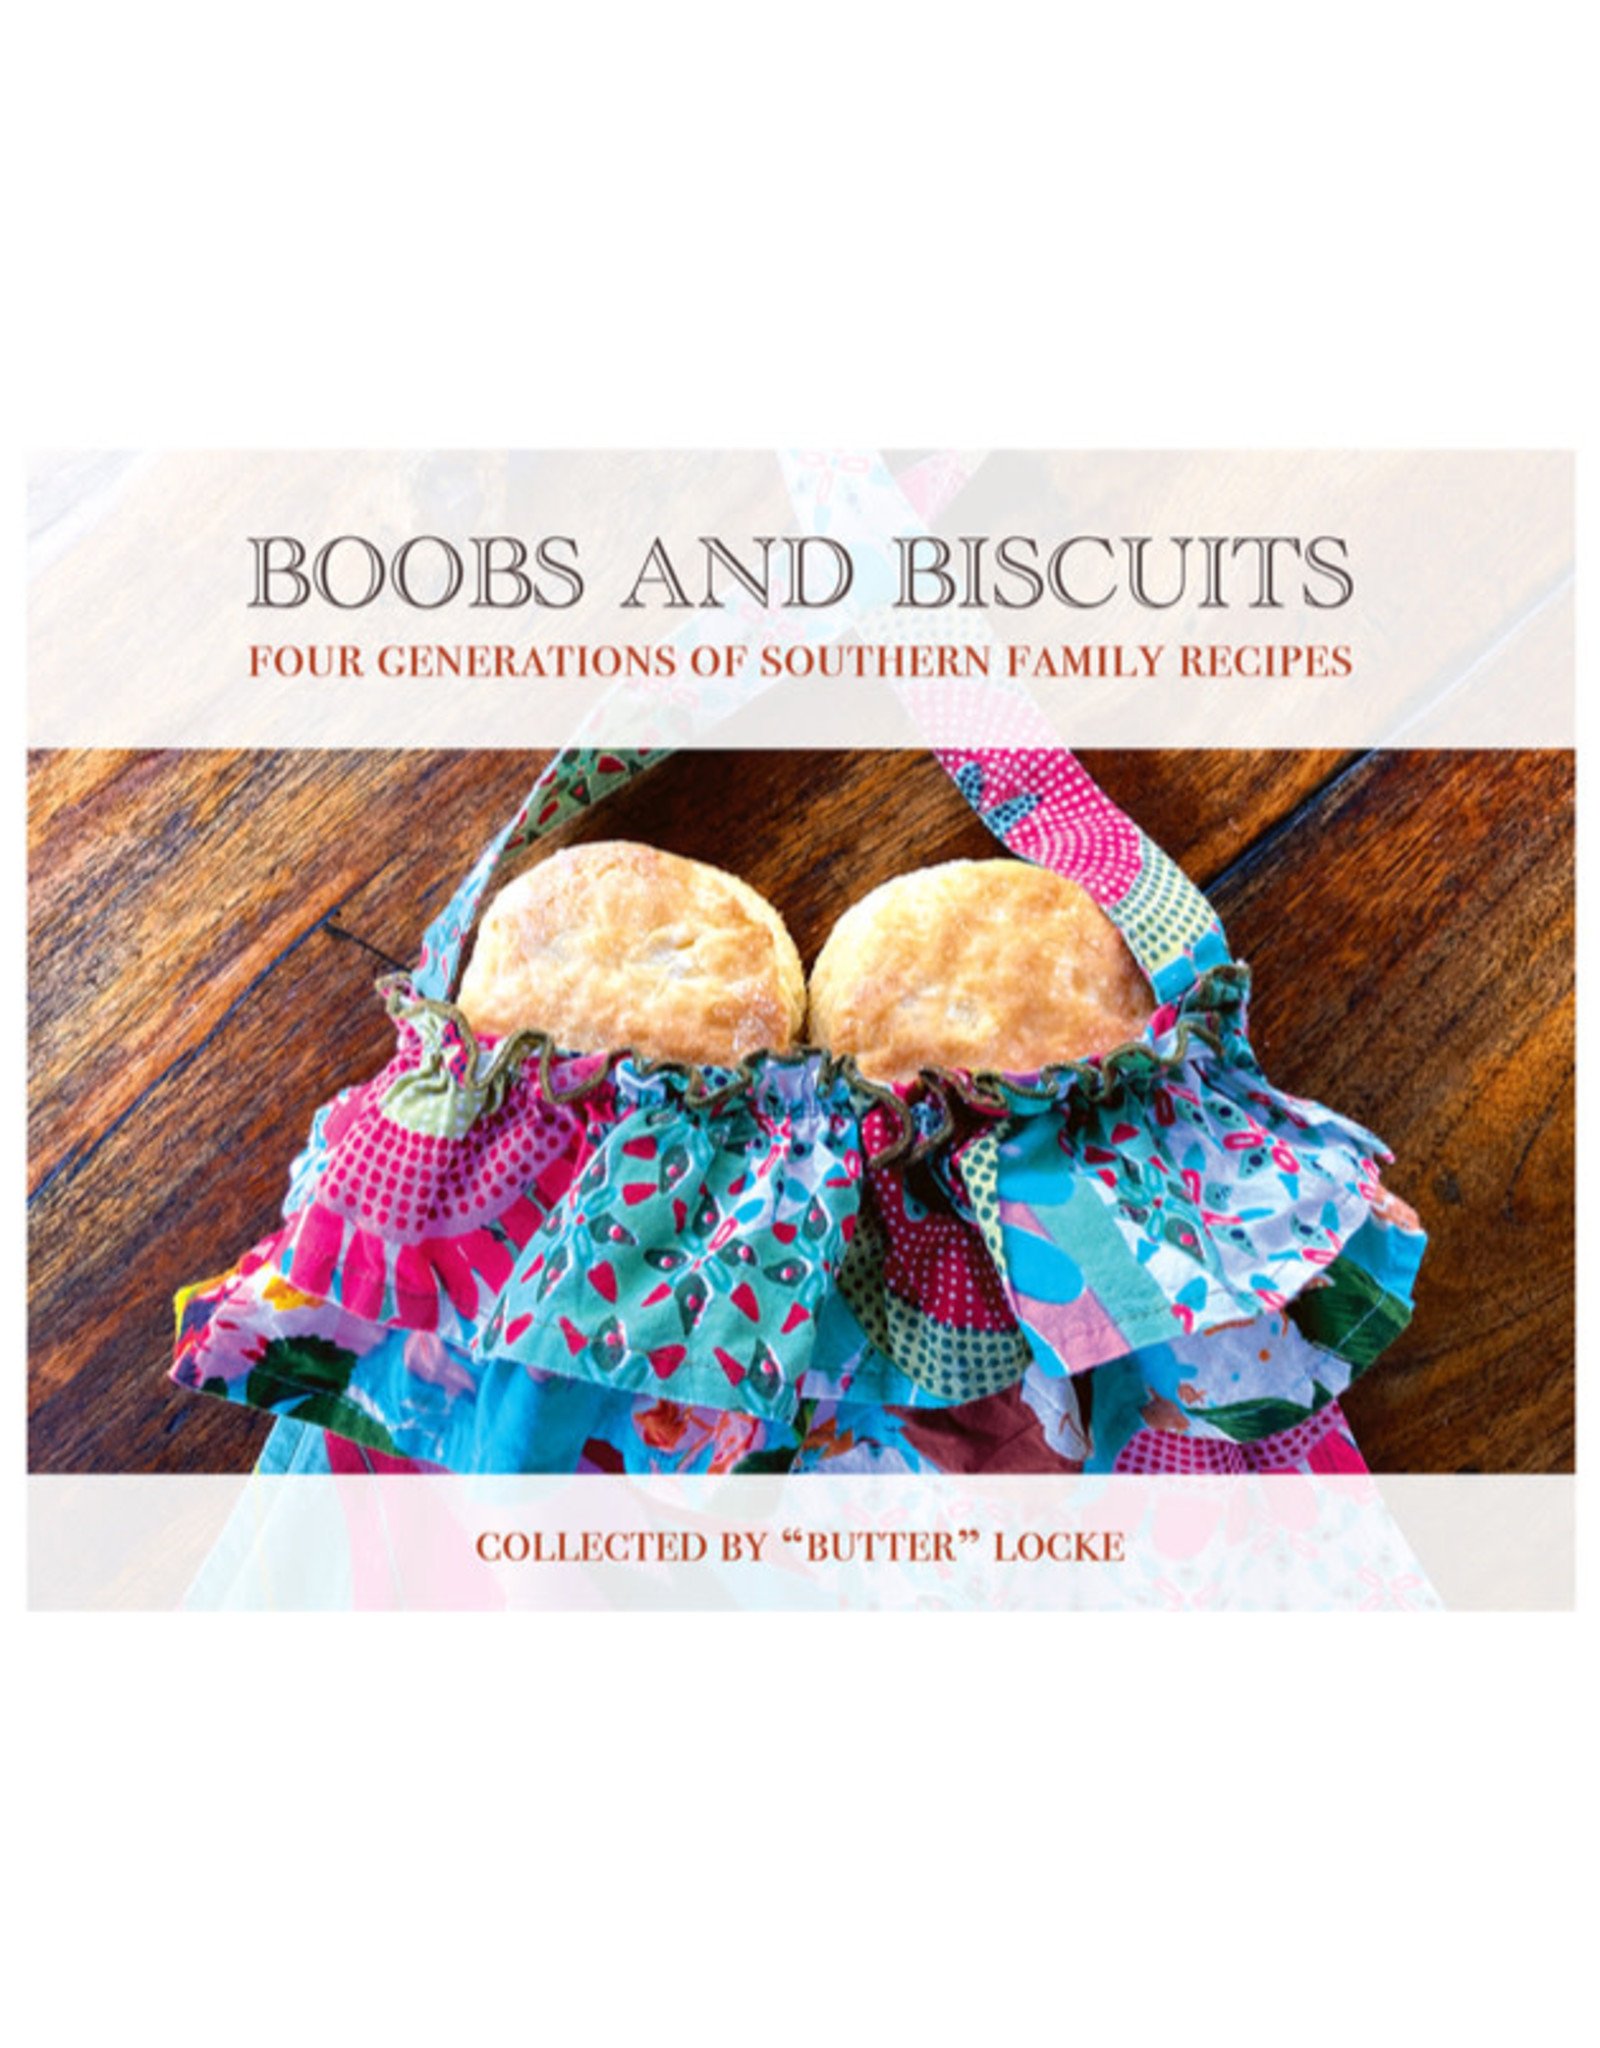 Boobs and Biscuits Cookbook